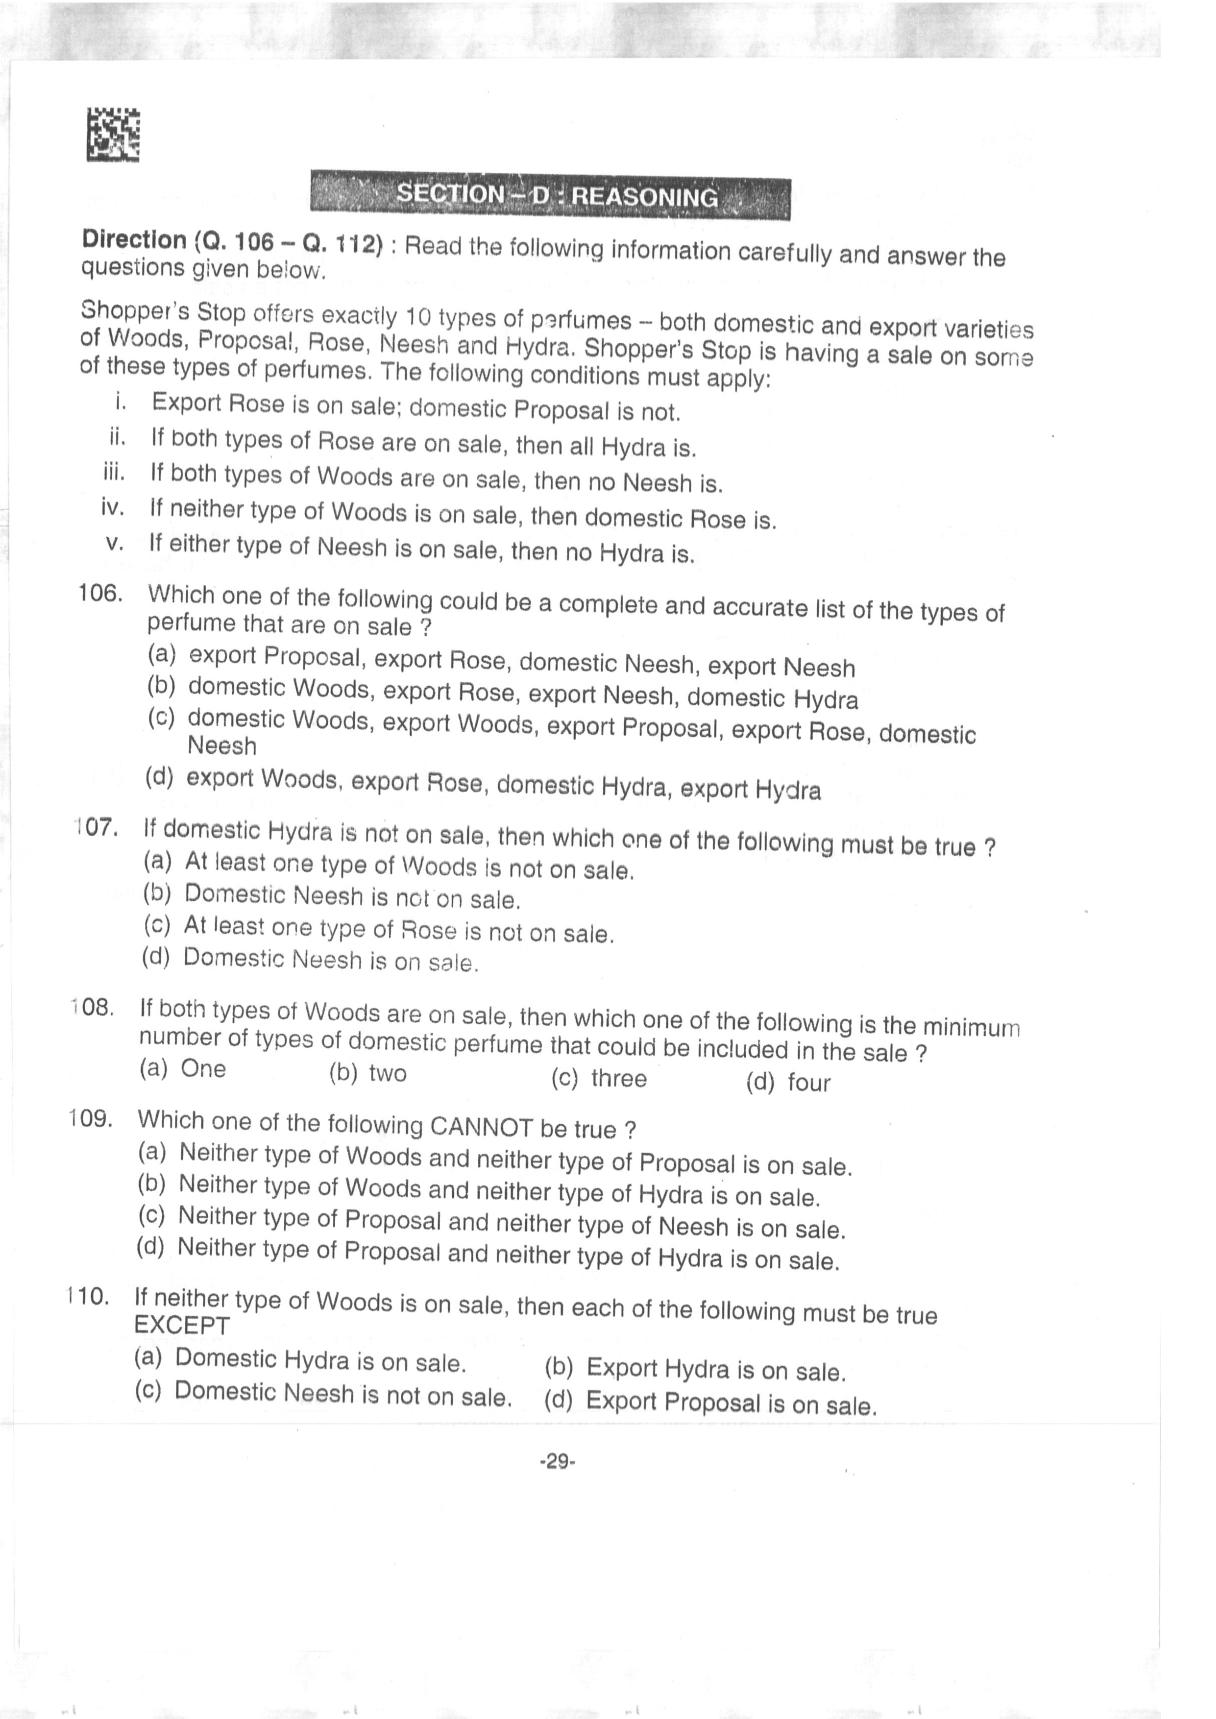 AILET 2019 Question Paper for BA LLB - Page 29